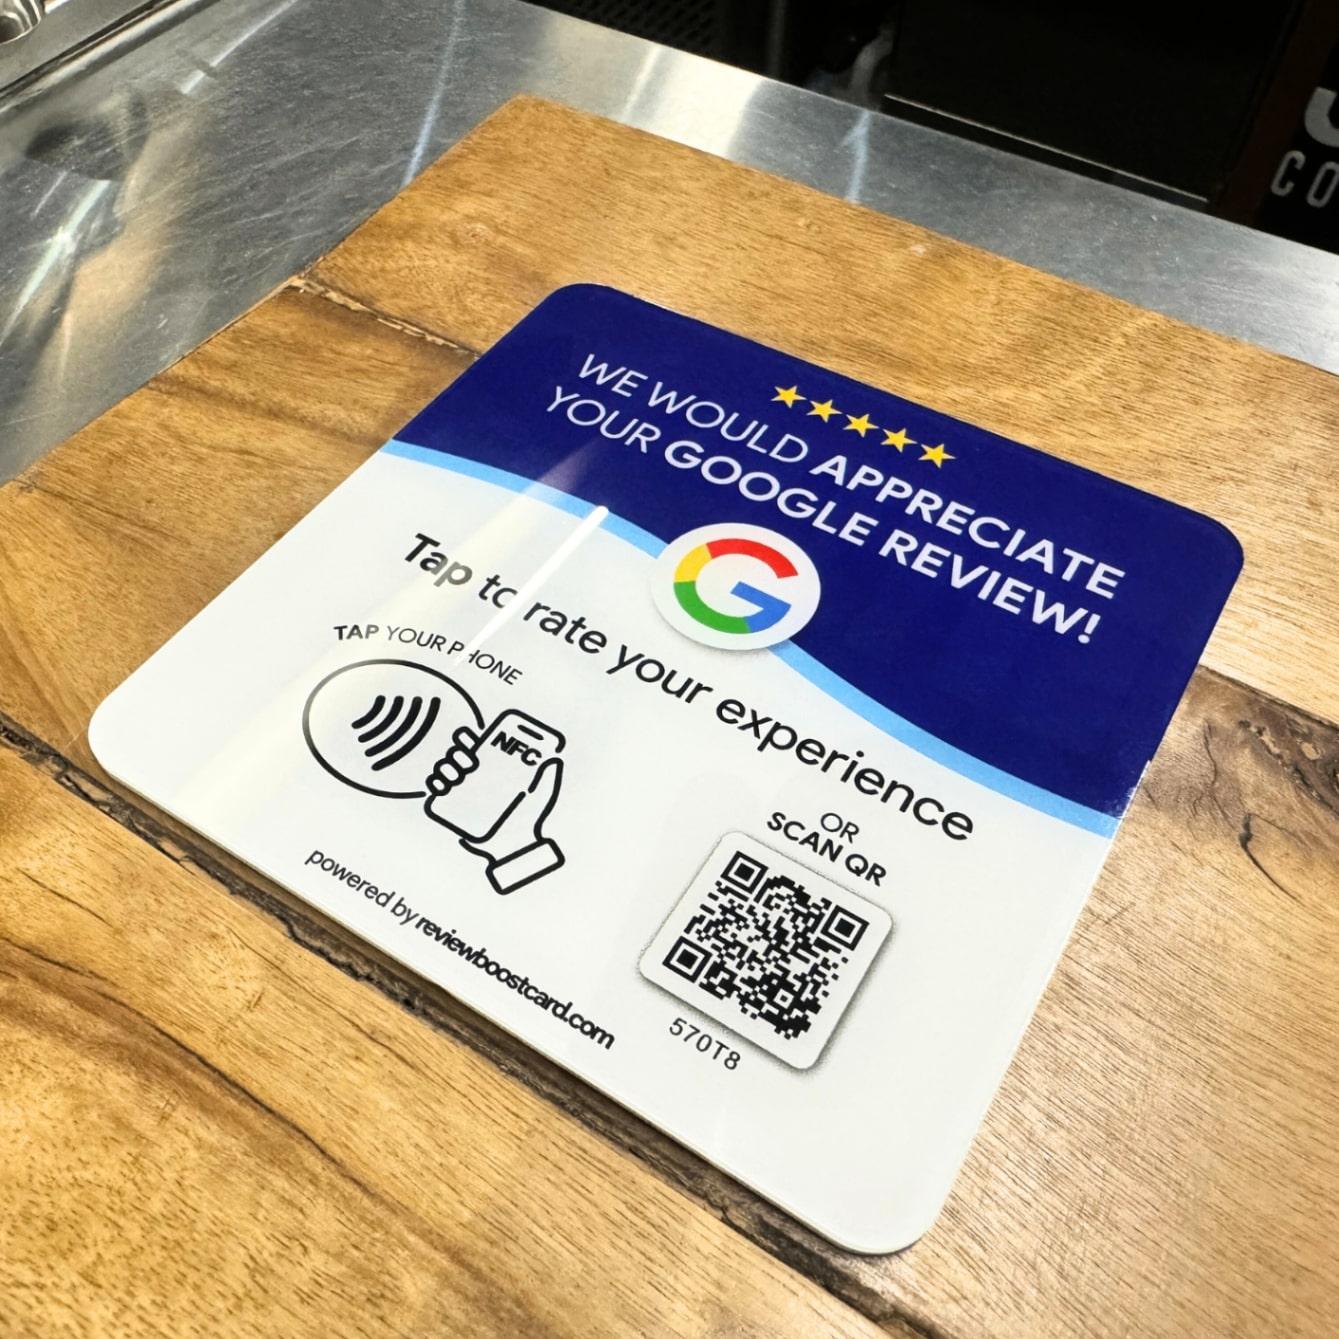 A ReviewBoost plaque on a wooden counter, encouraging customers to leave a Google review by tapping their phone or scanning the QR code